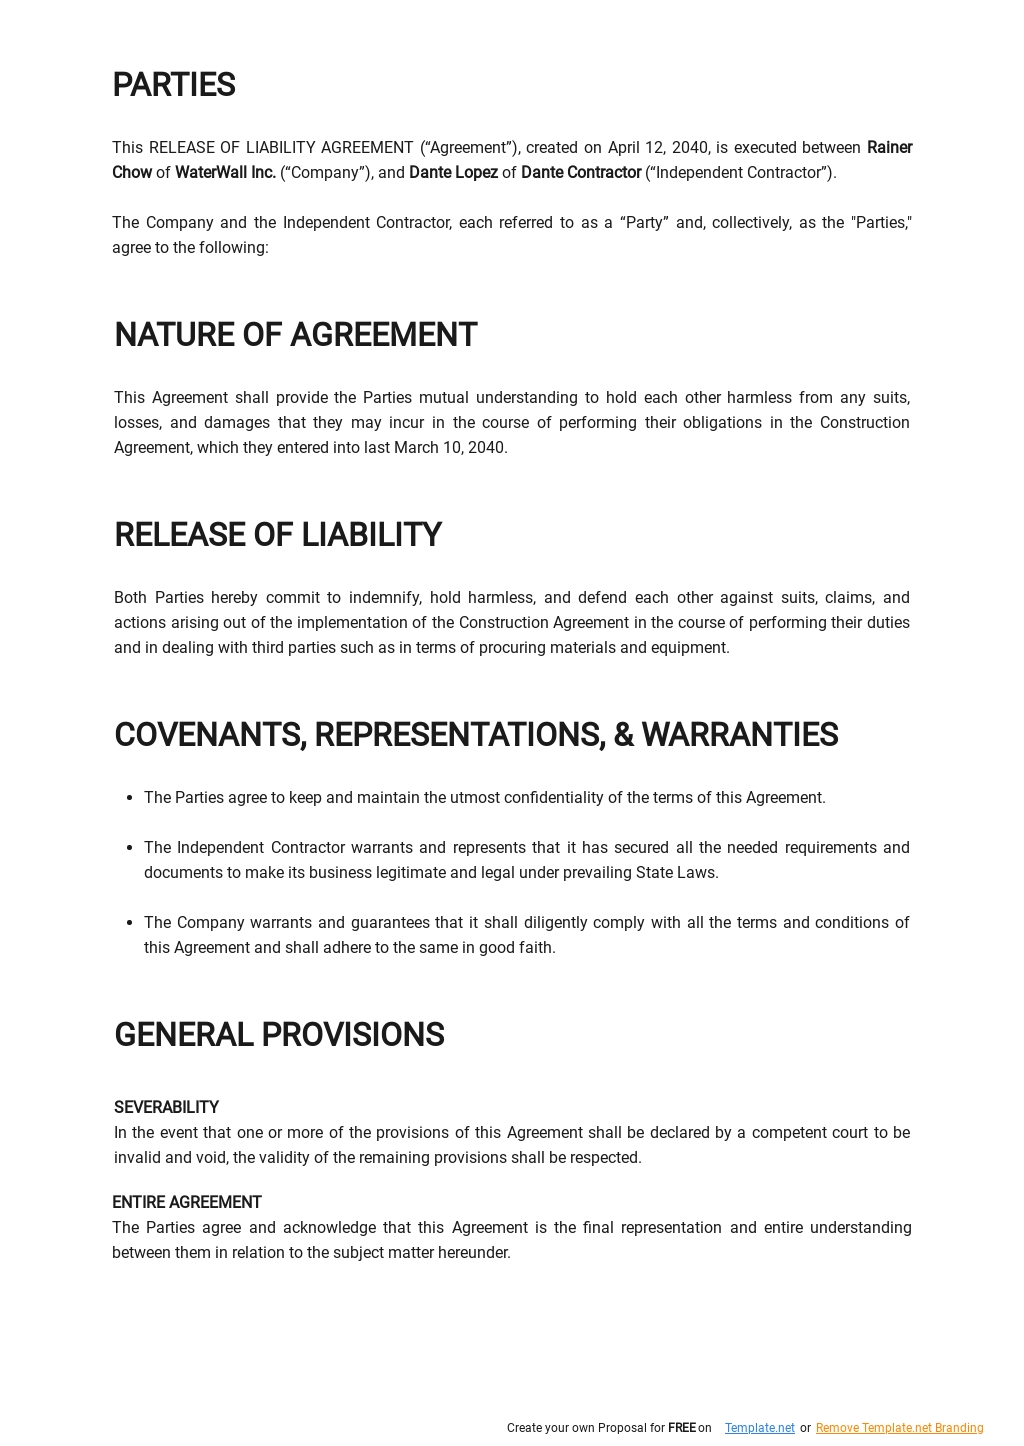 Release of Liability Agreement Template 1.jpe